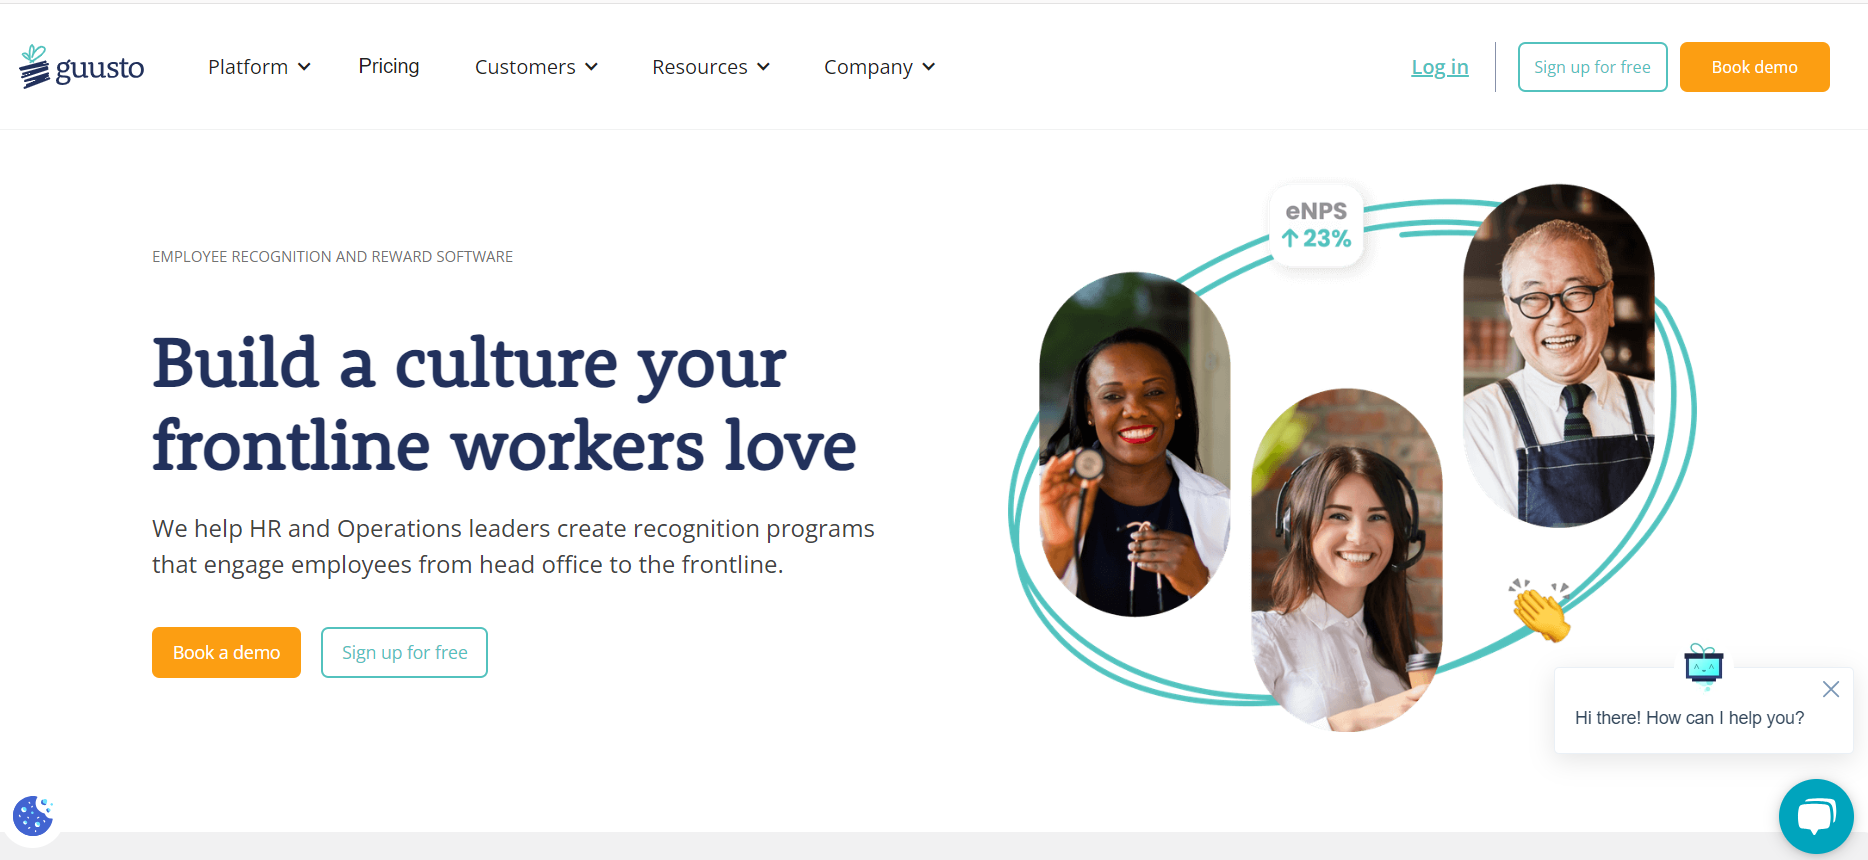 This is the image of the Home page of Guusto for an employee engagement survey. 